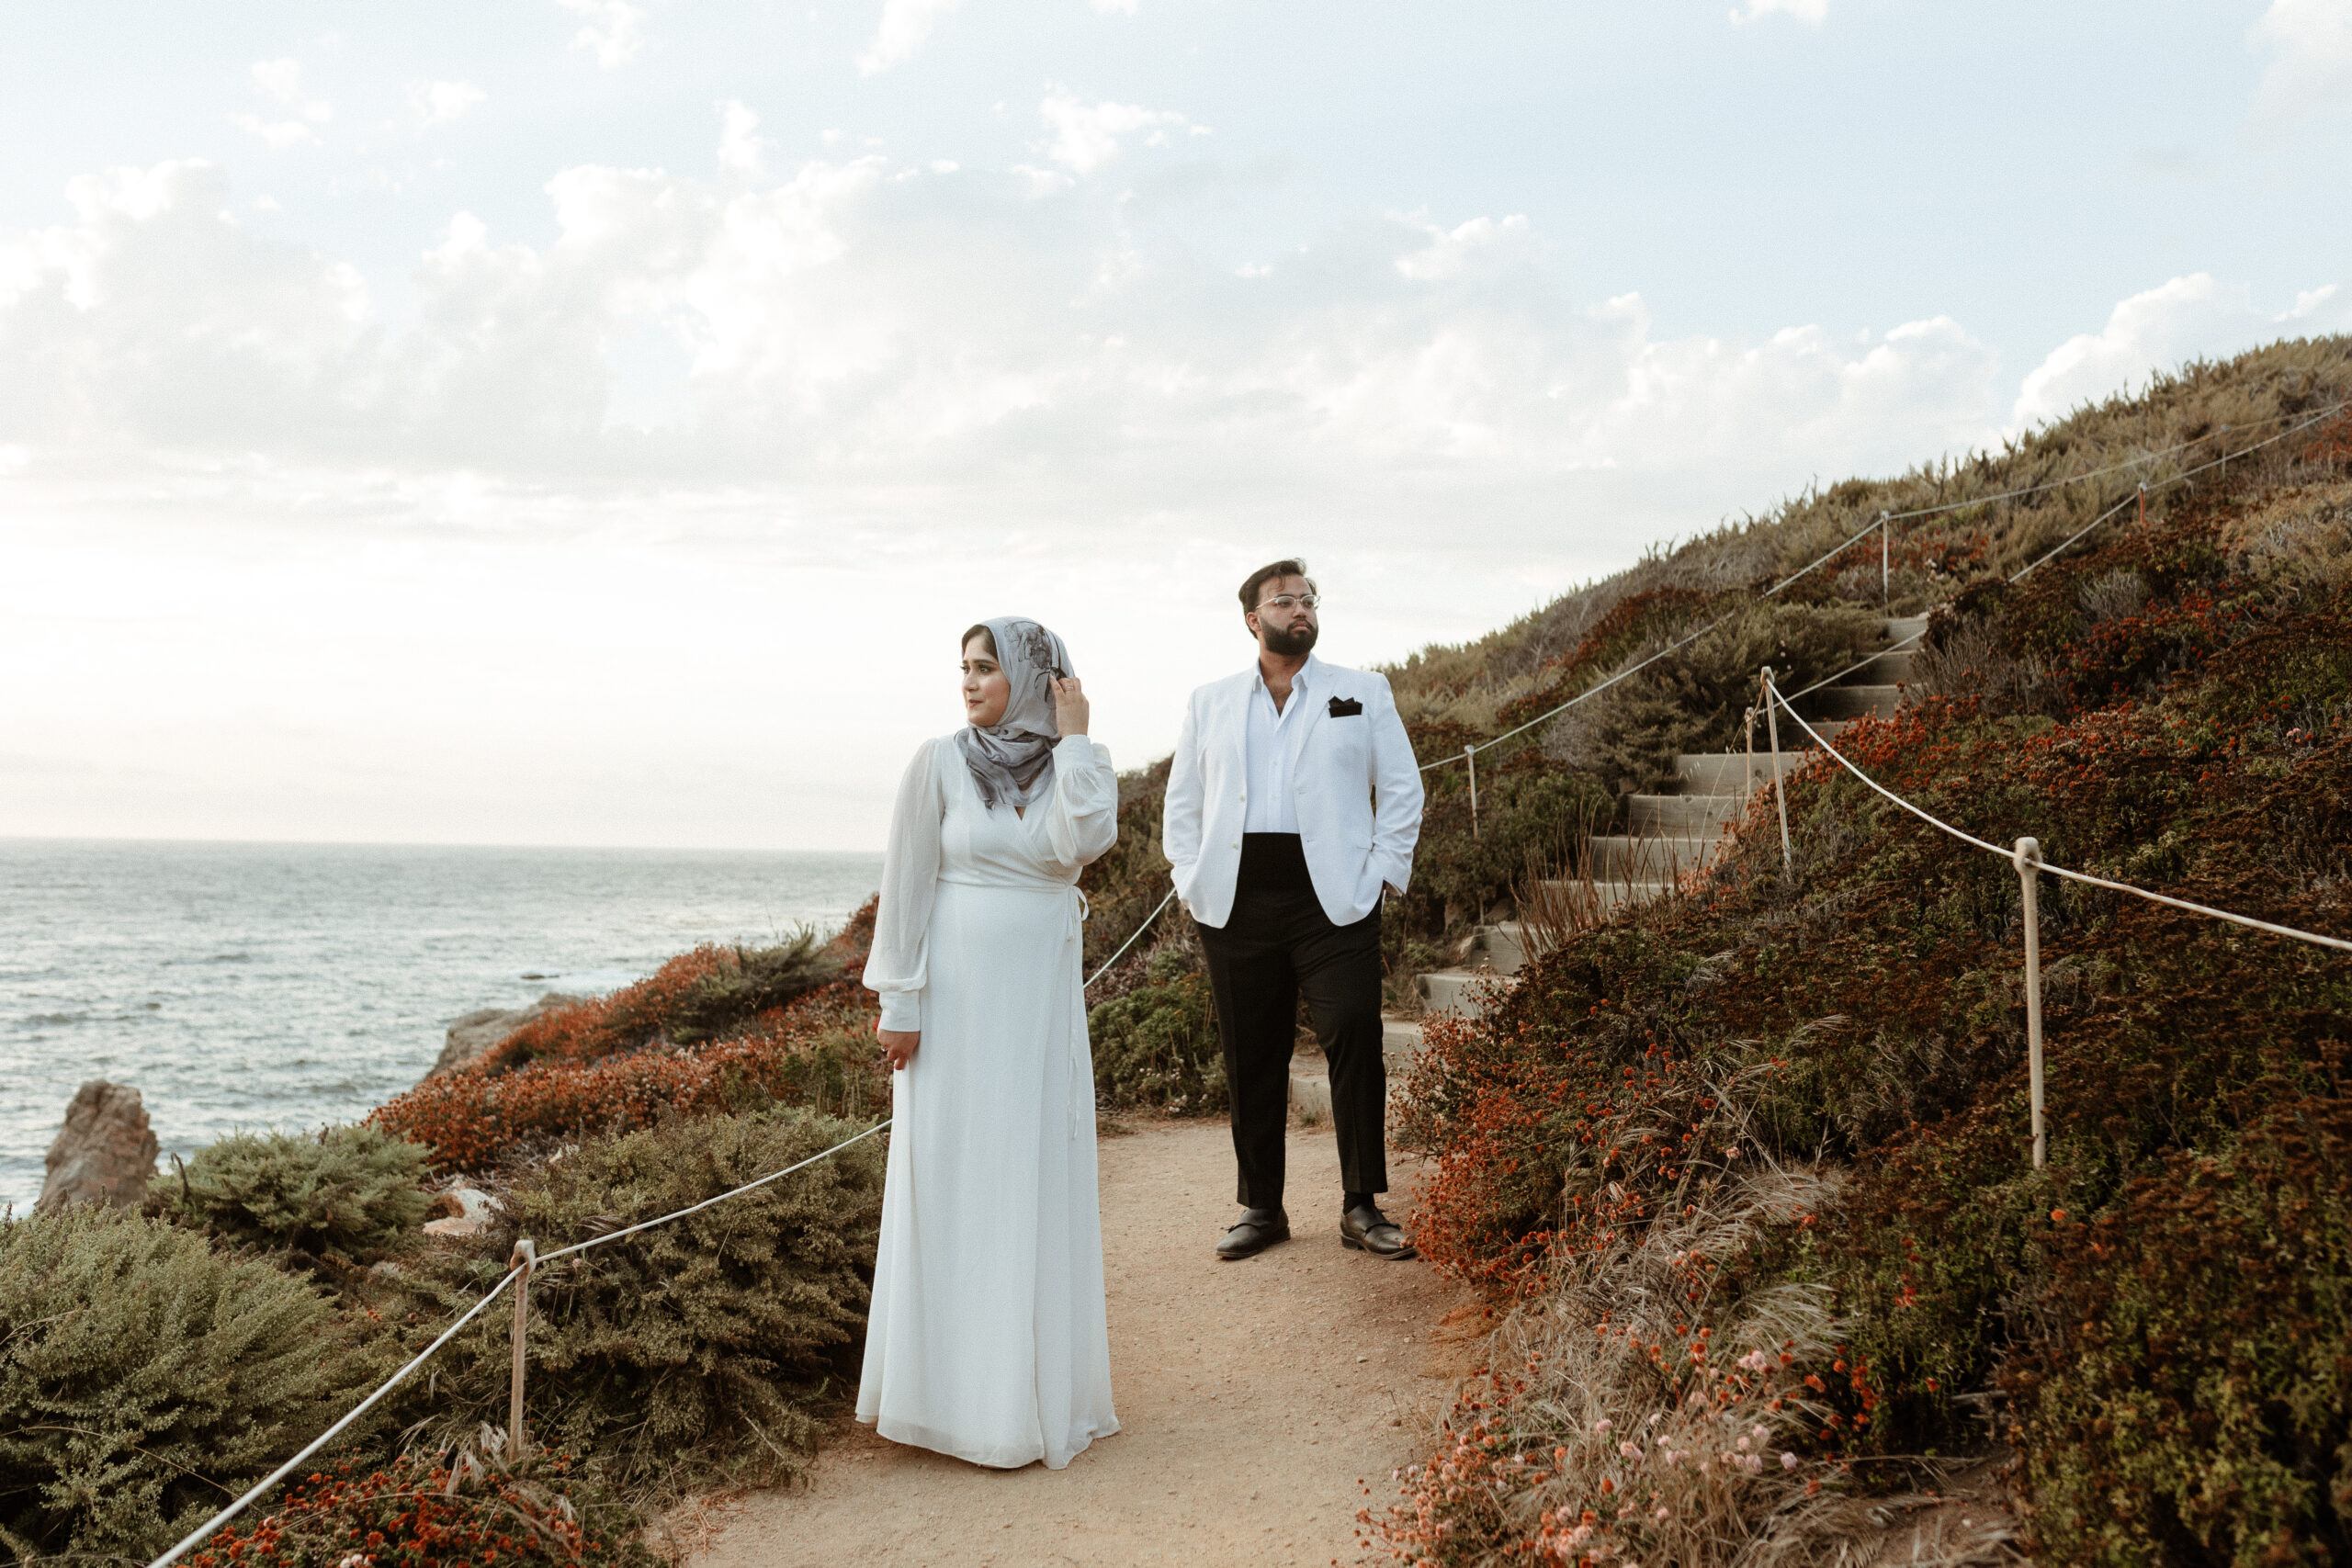 Mushfi and Jasmine's editorial-inspired Big Sur Couple's Session at Garrapata State Park in Northern California.